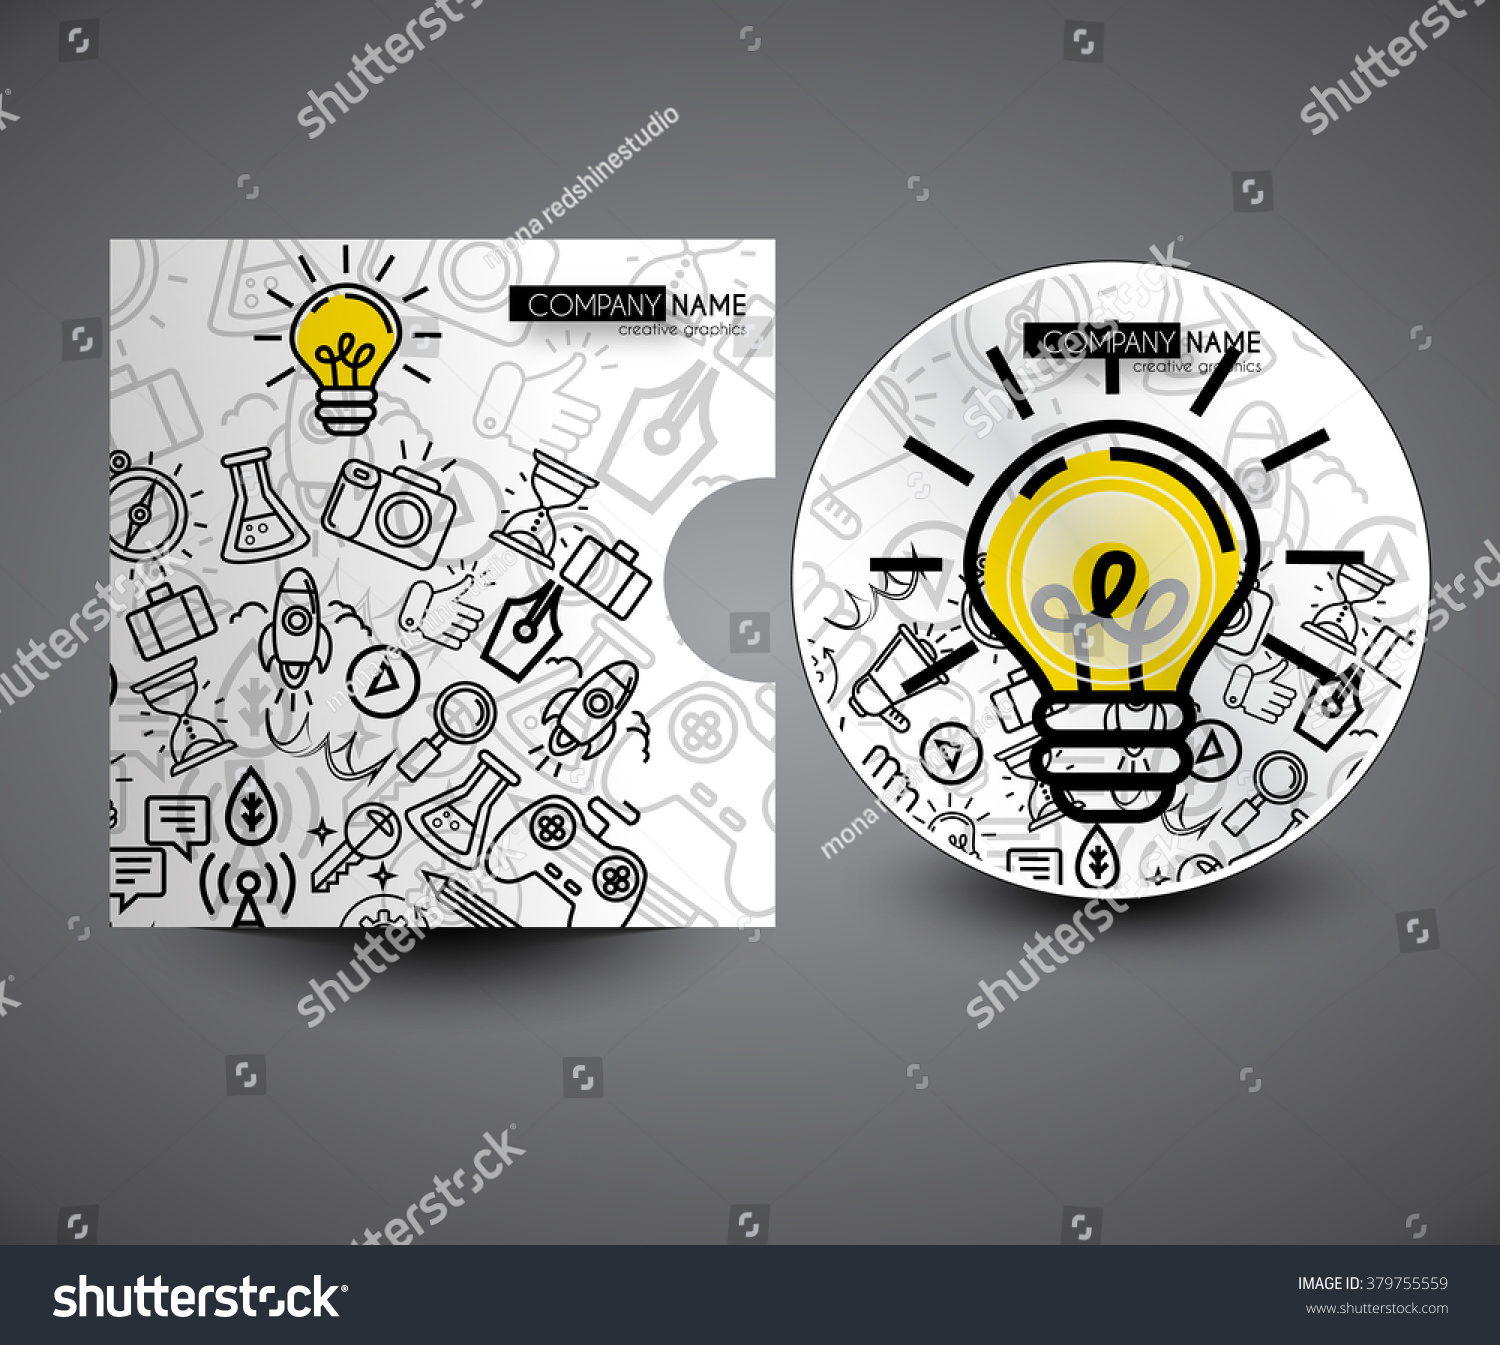 Professional Doodles Cd Cover Presentation Design Stock Vector Royalty Free